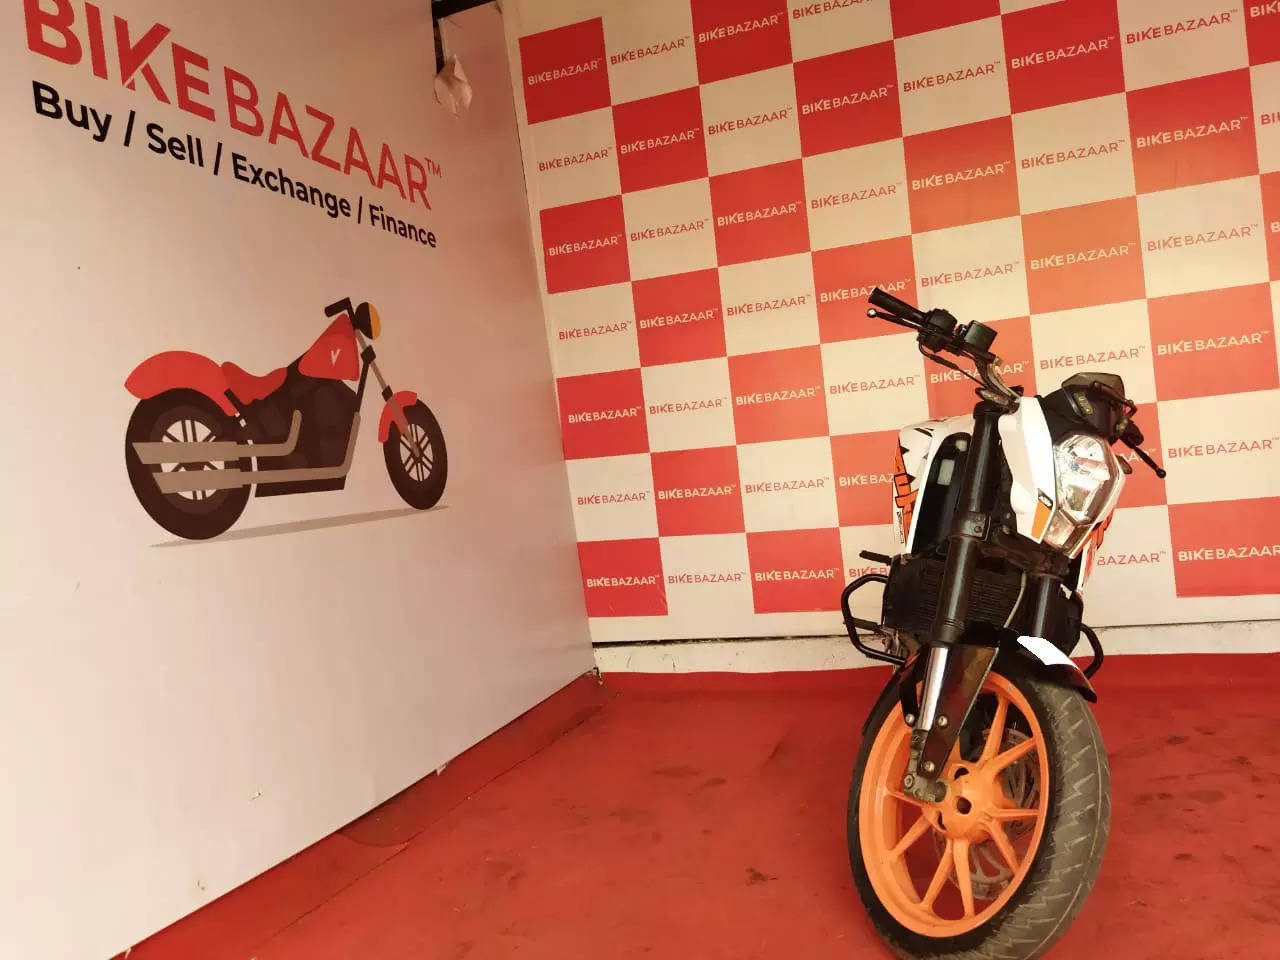  “It took us three months to hit our first INR 1-crore disbursal in 2017 and today we have reached a level of INR 100 crore disbursal in a month,&quot; said V Karunakaran, co-founder & joint MD – Bike Bazaar.